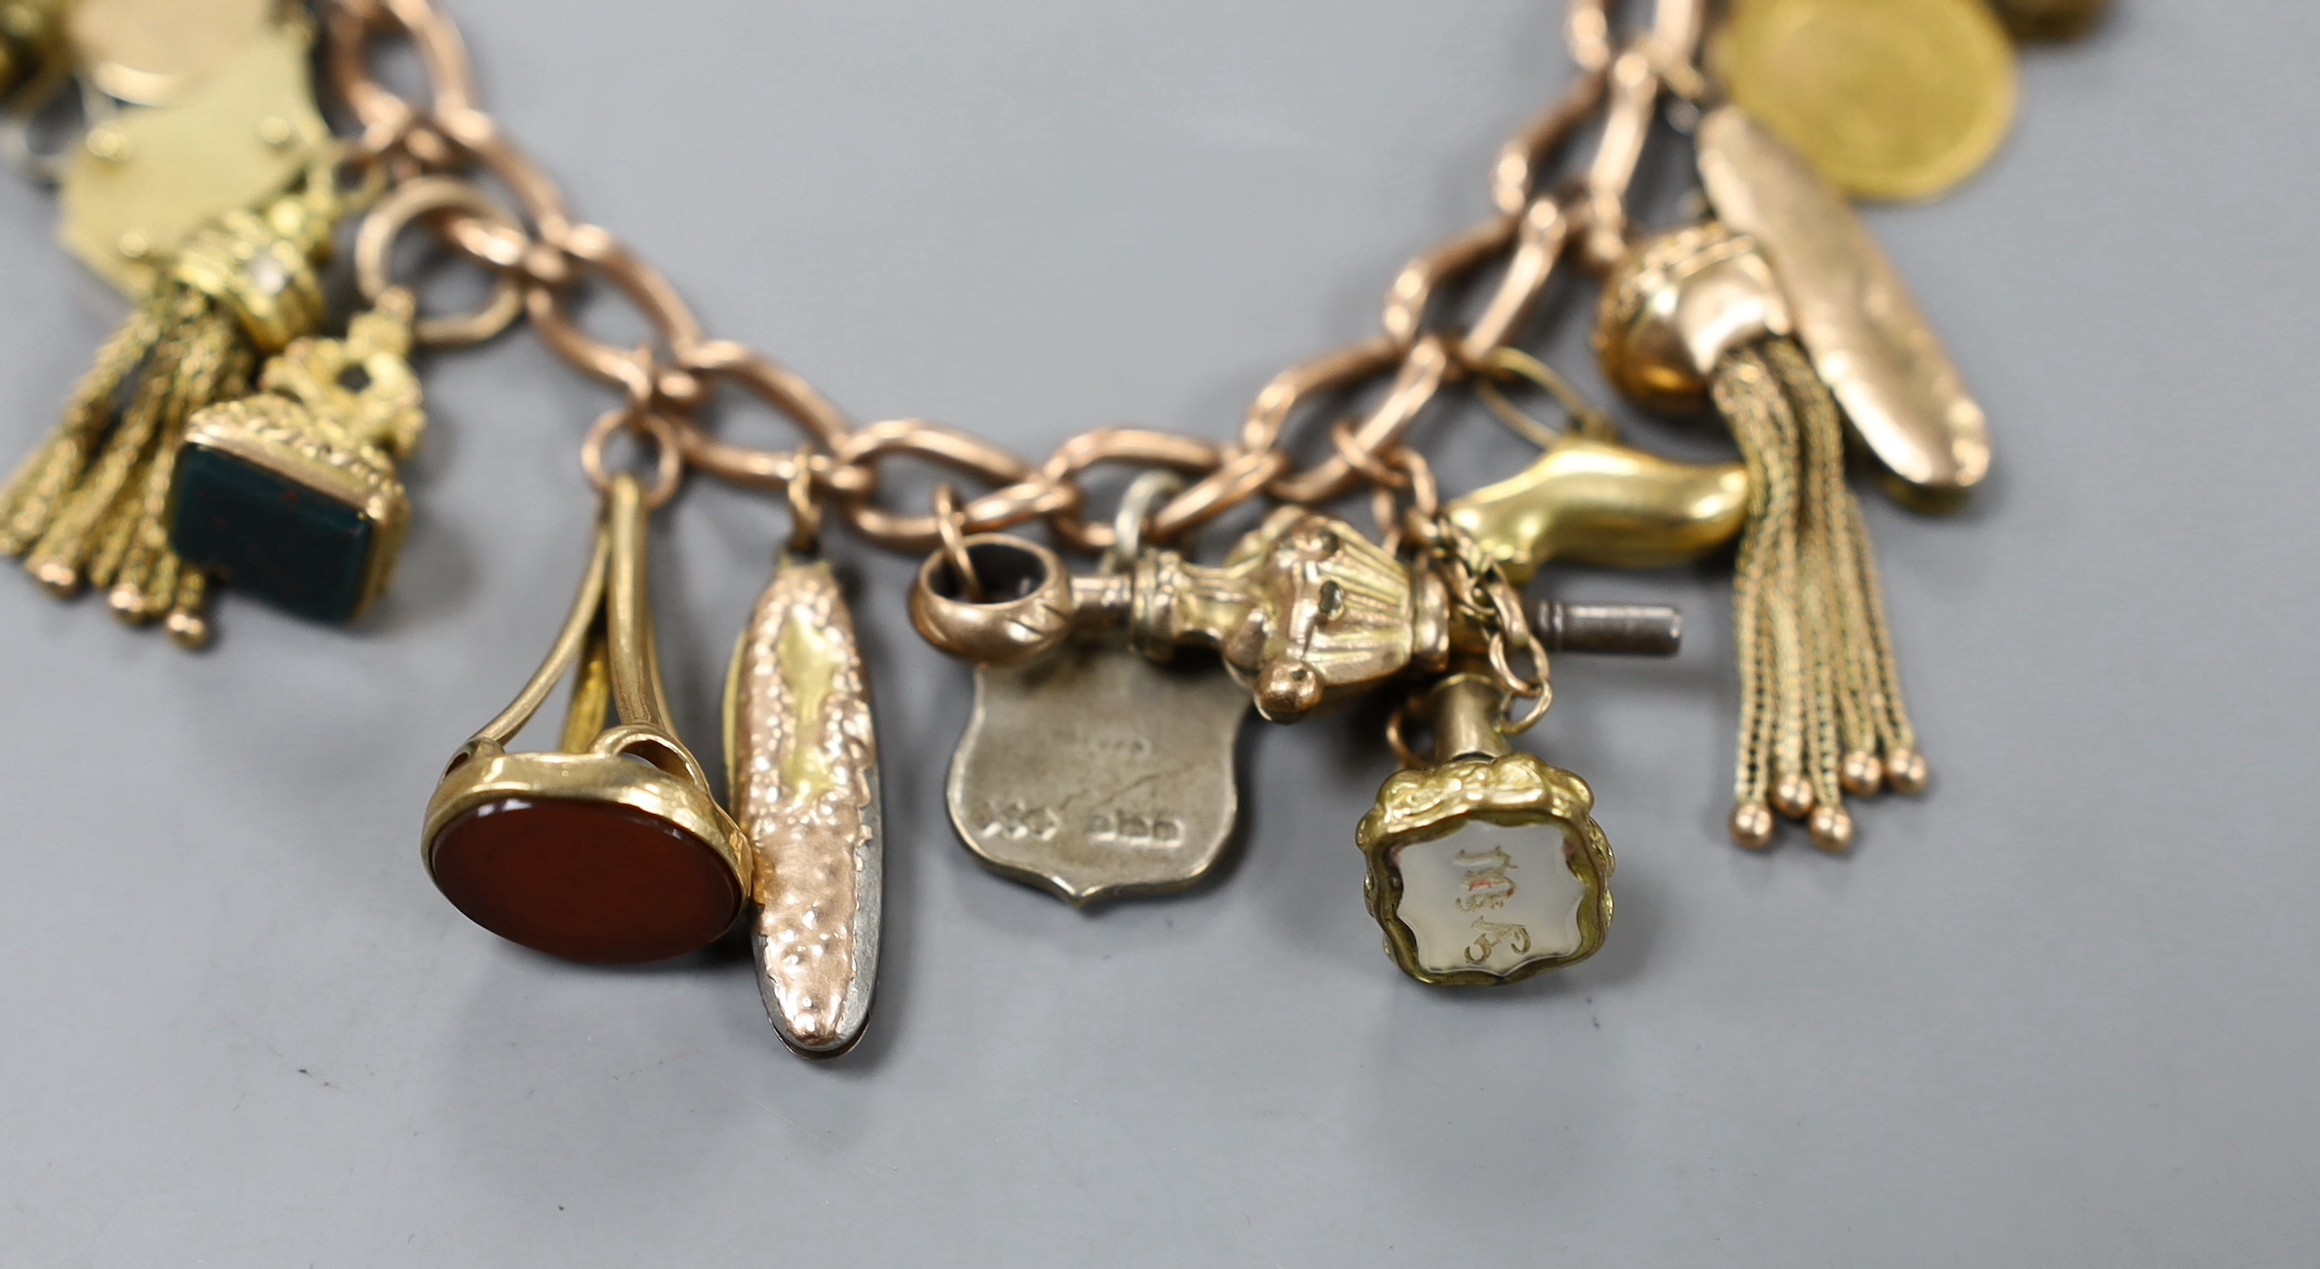 A 9ct charm bracelet, hung with assorted charms including two 9ct, silver and enamel, gilt metal and two gold coins gross weight 61.4 grams.